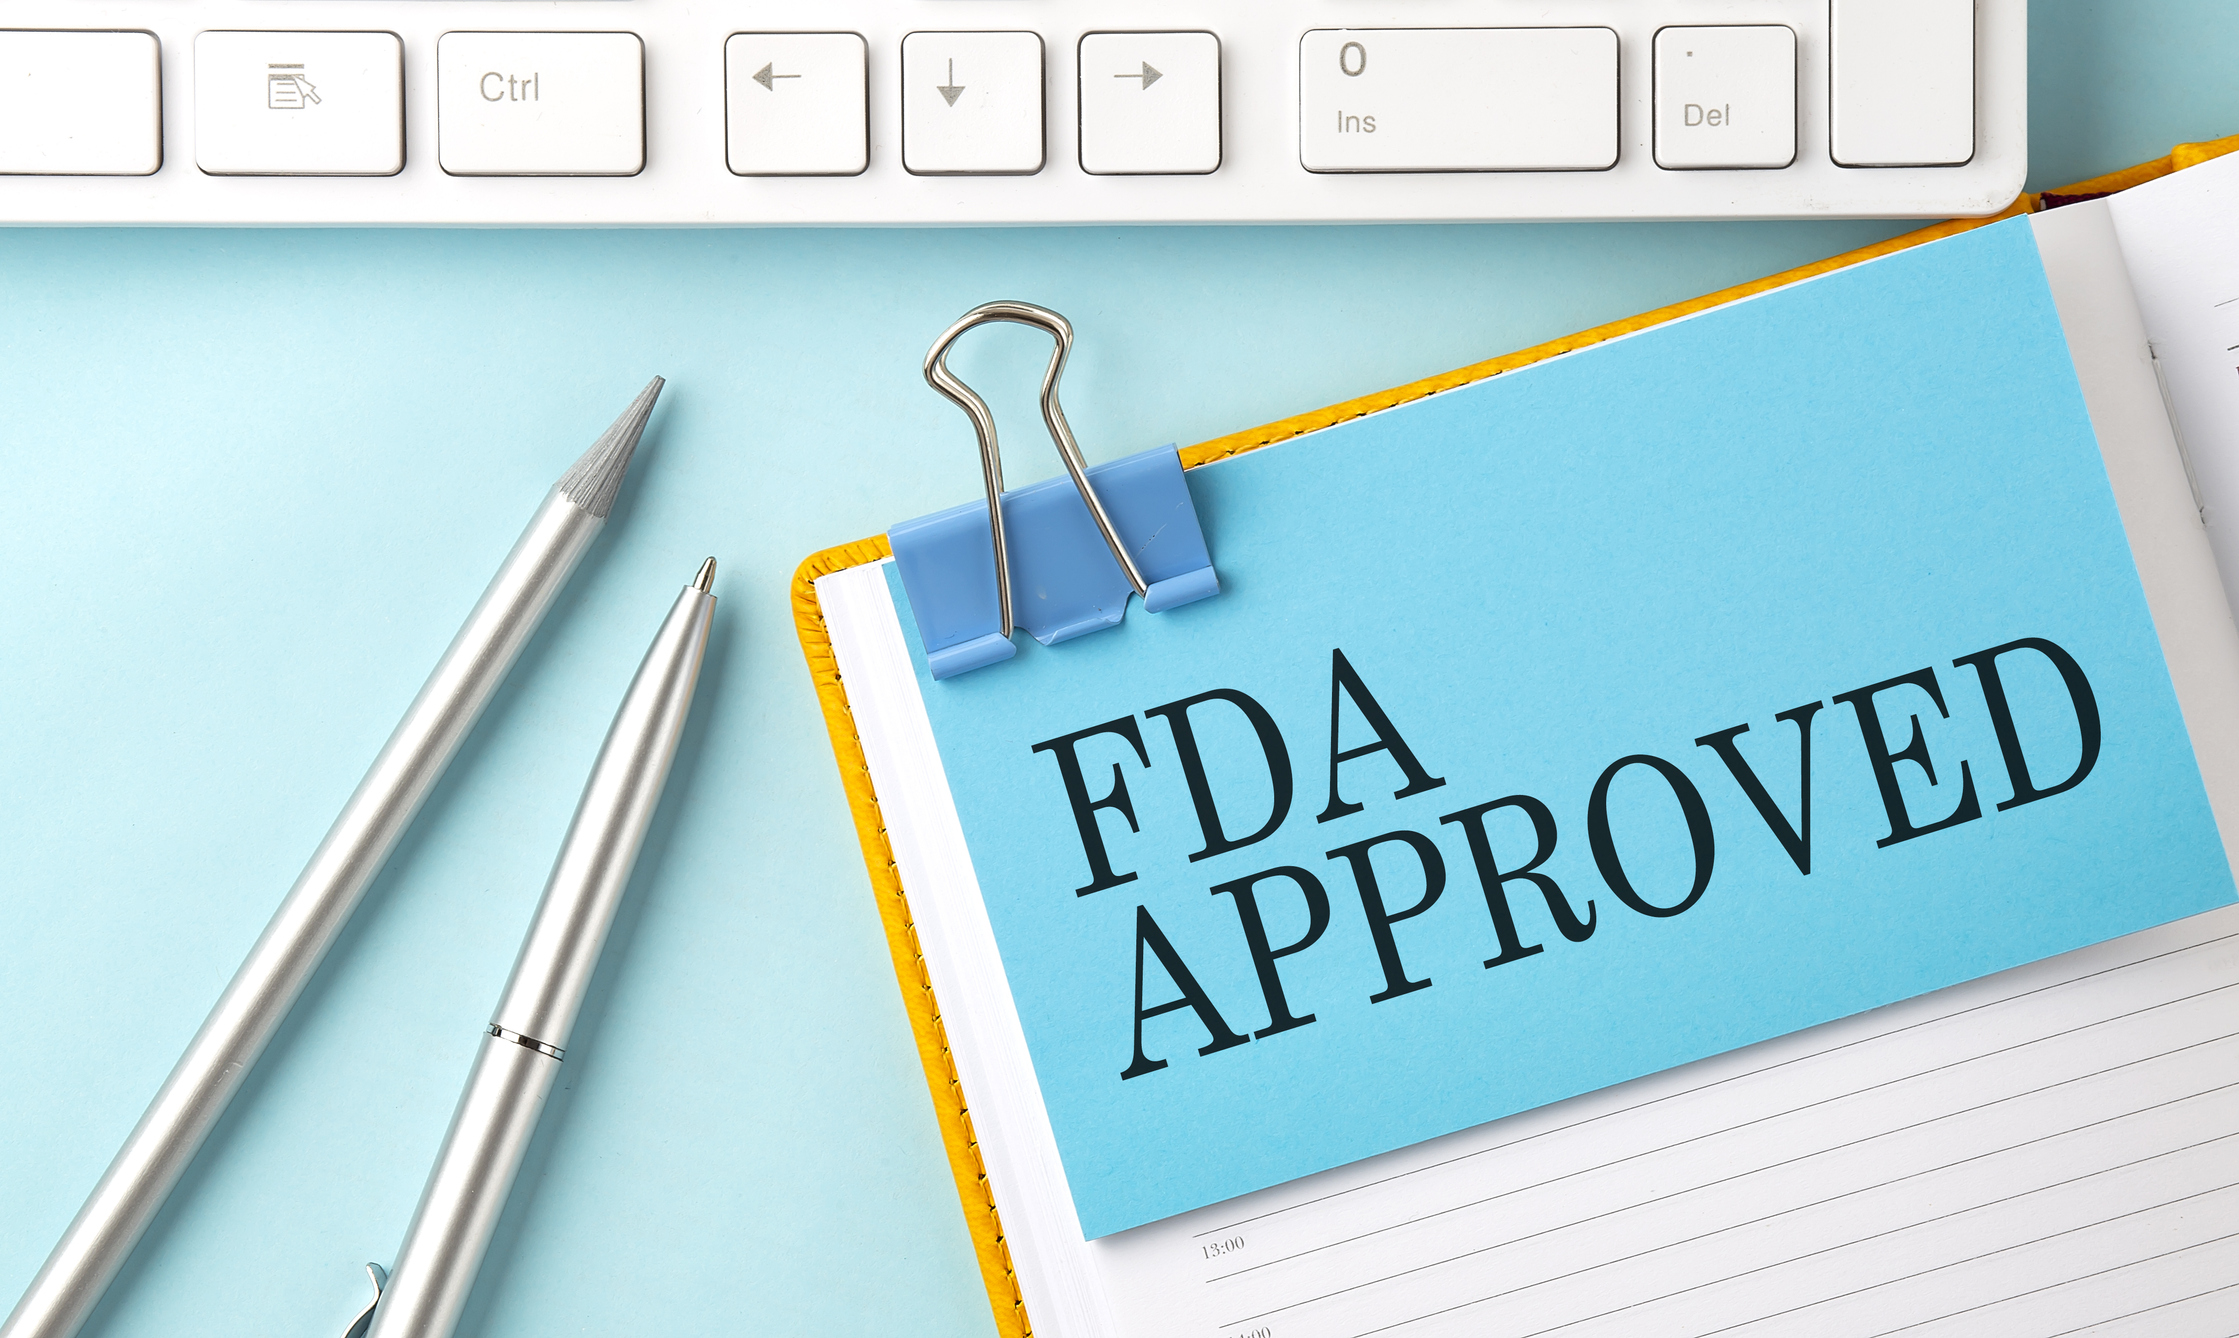 How to Make the FDA Happy: 7 MedTech Device Design Pro Tips